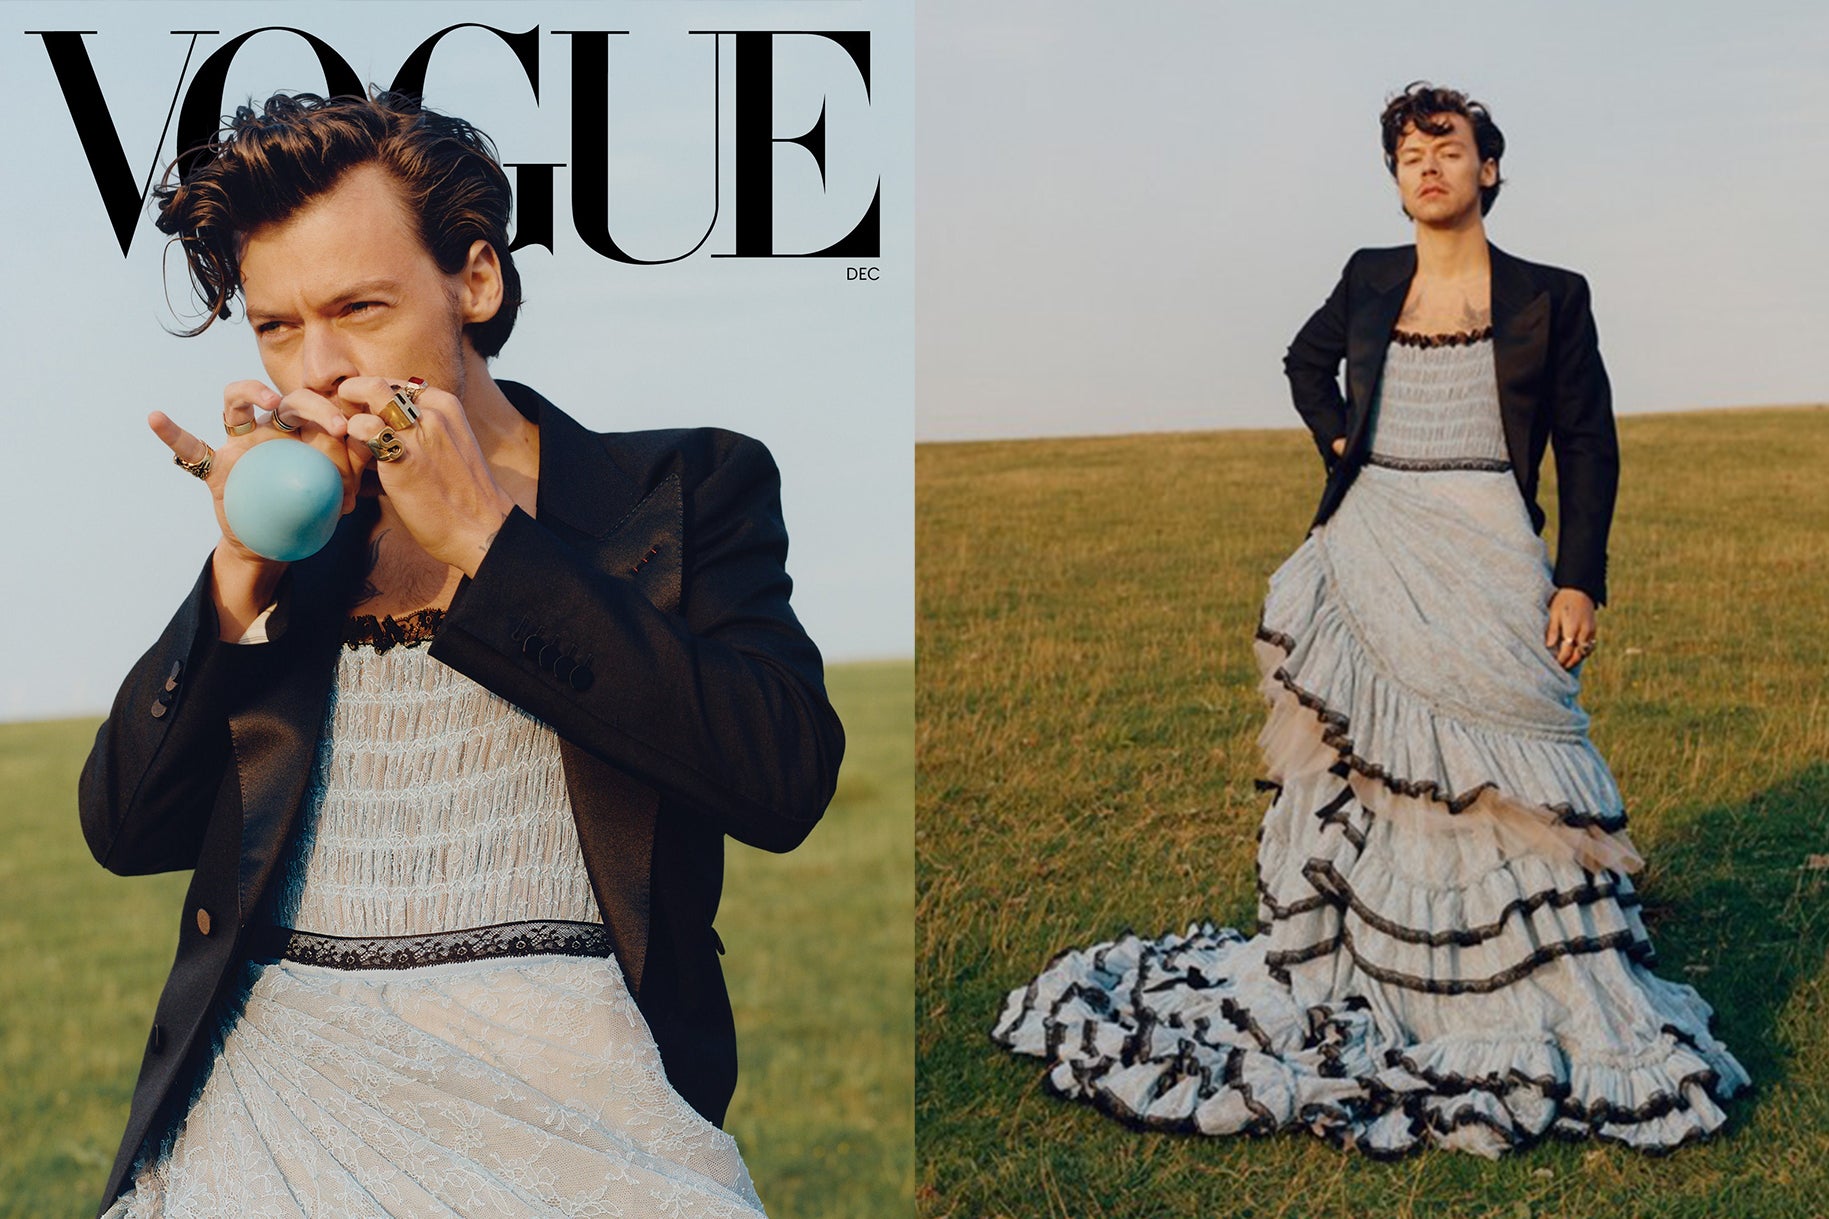 Harry Styles Vogue Cover December 2020 | Photography Tyler Mitchell